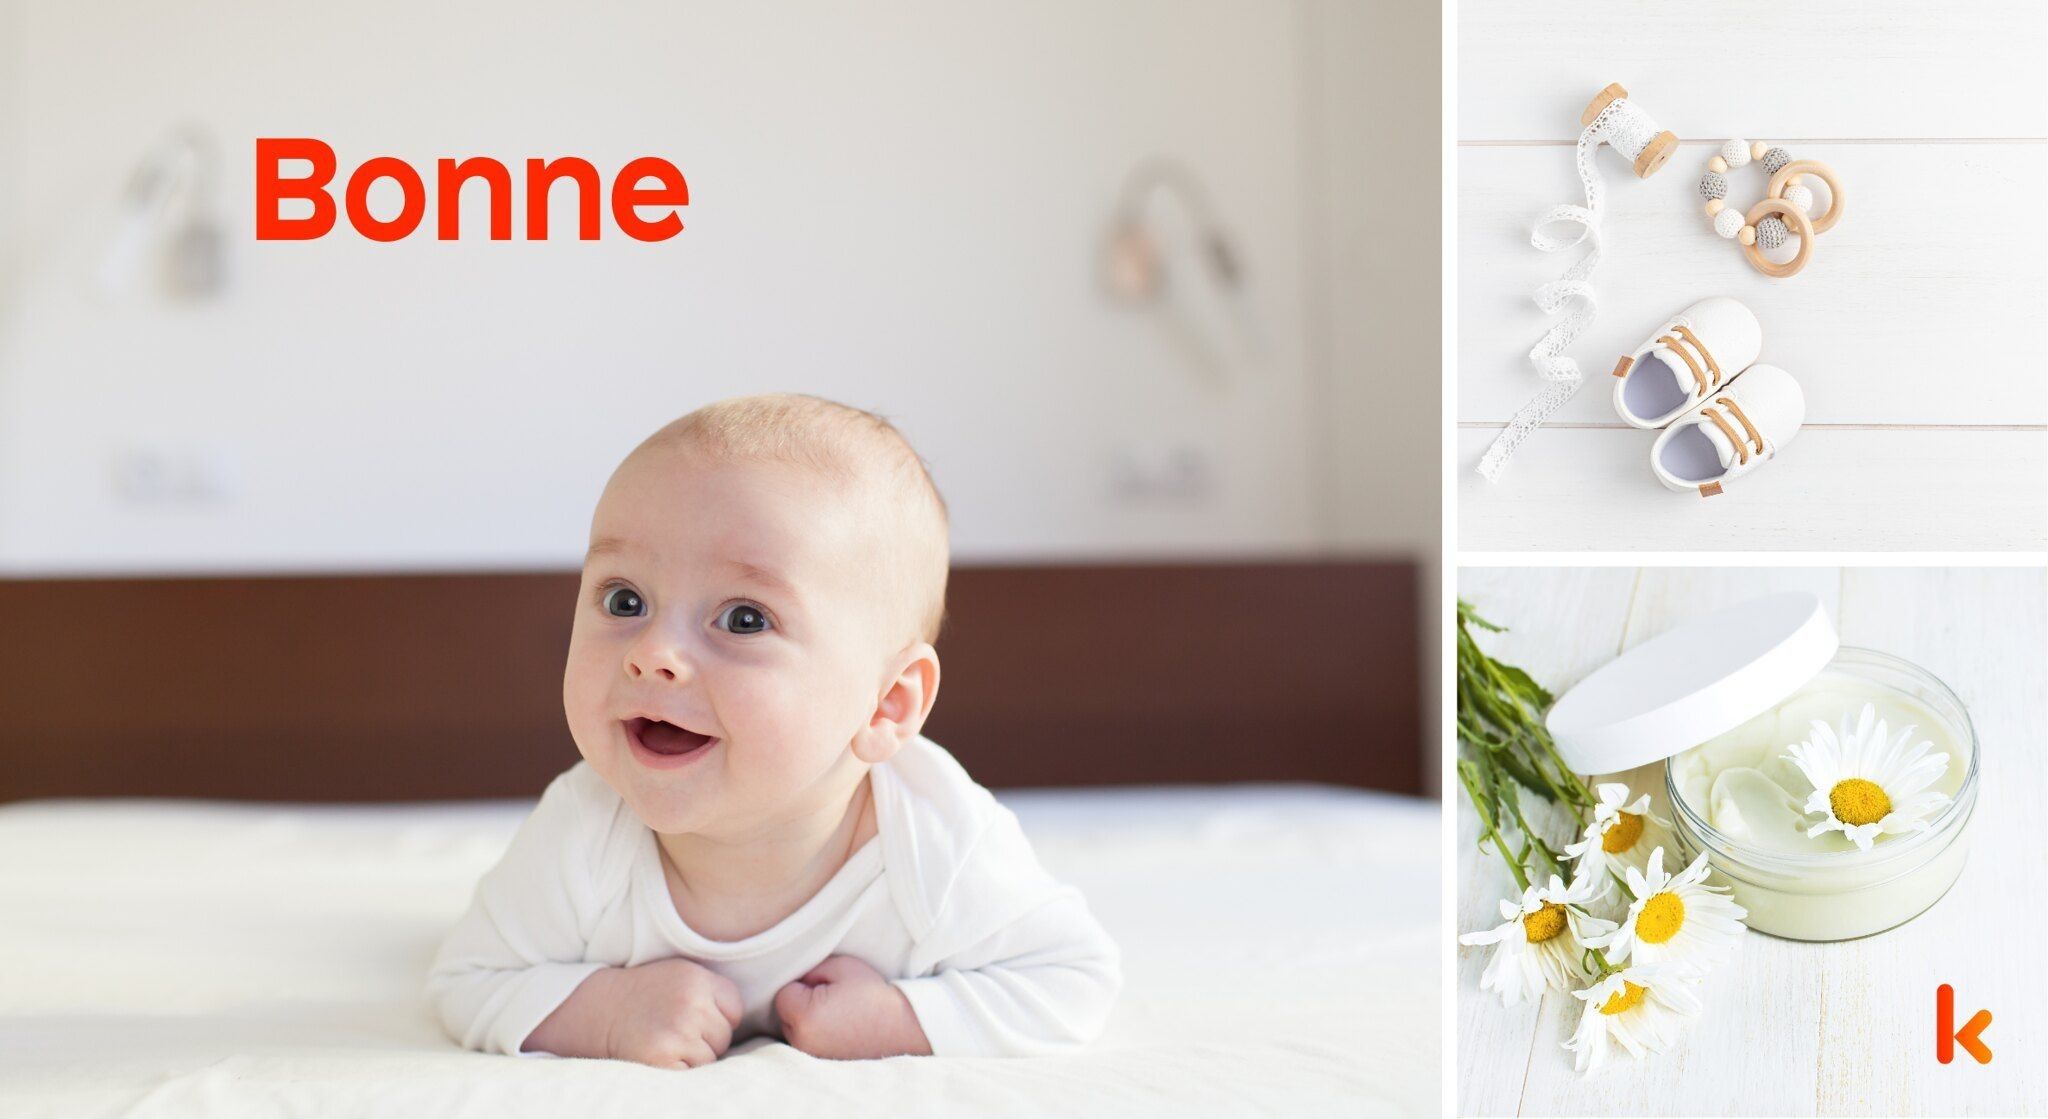 Meaning of the name Bonne